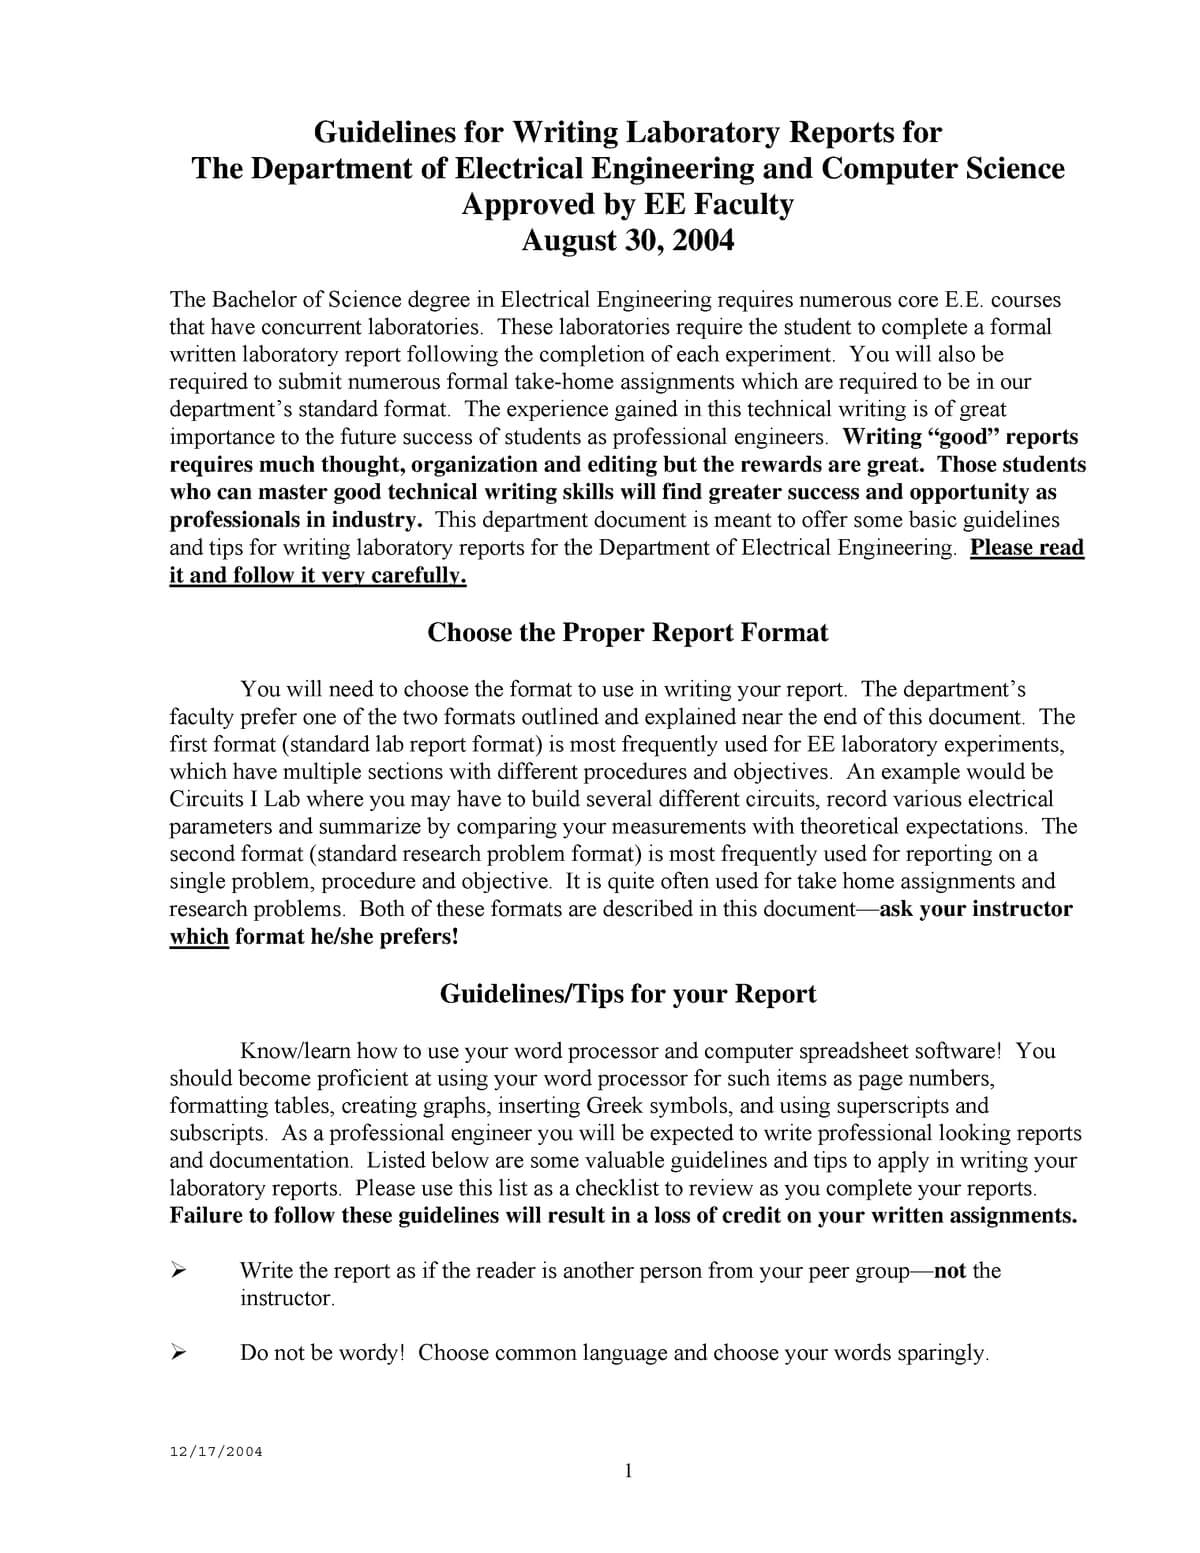 Formal Lab Report Template